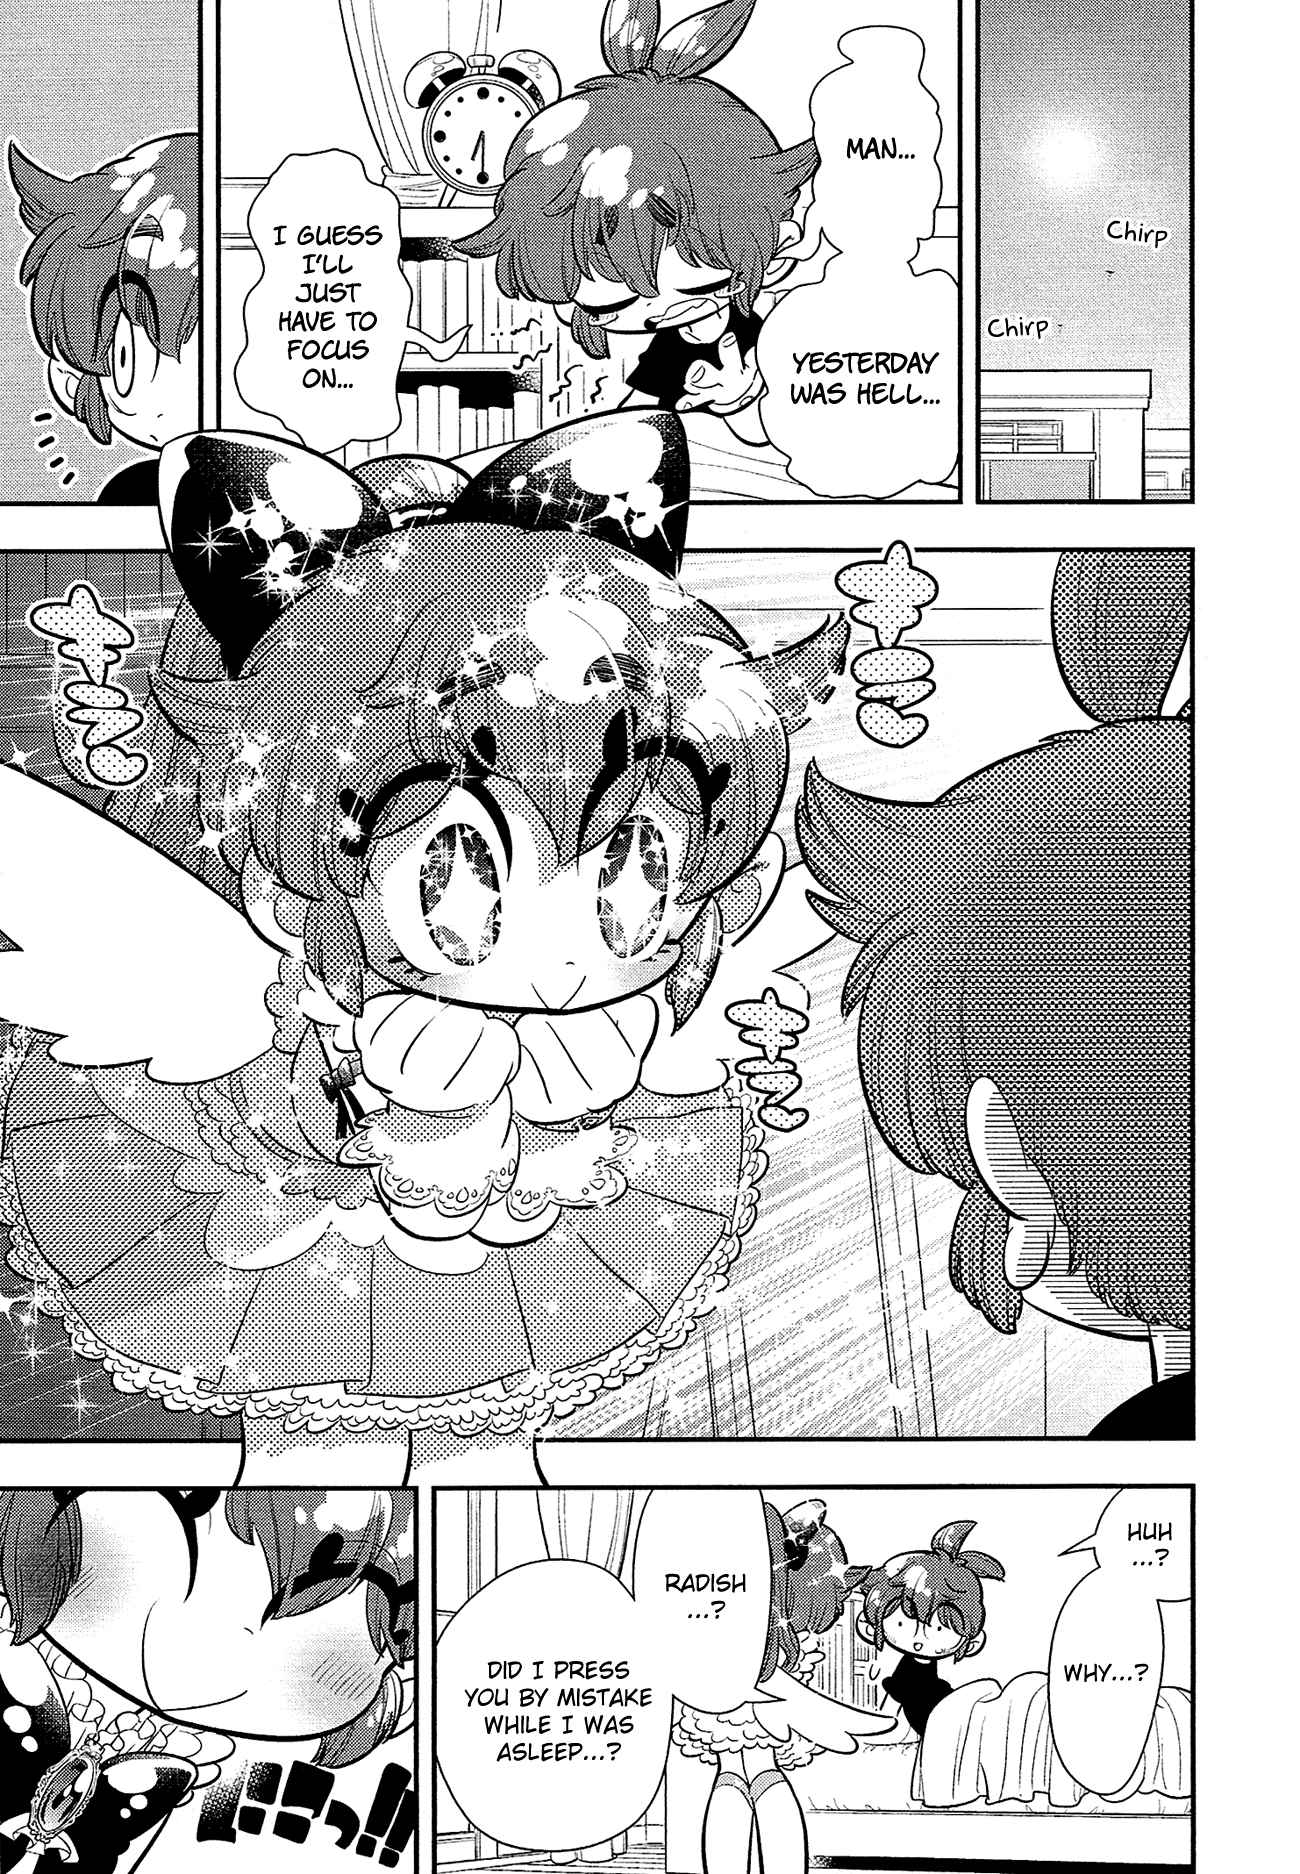 Bokura wa Mahou Shounen Vol. 2 Ch. 7 Is That How They're Gonna Find Out!?